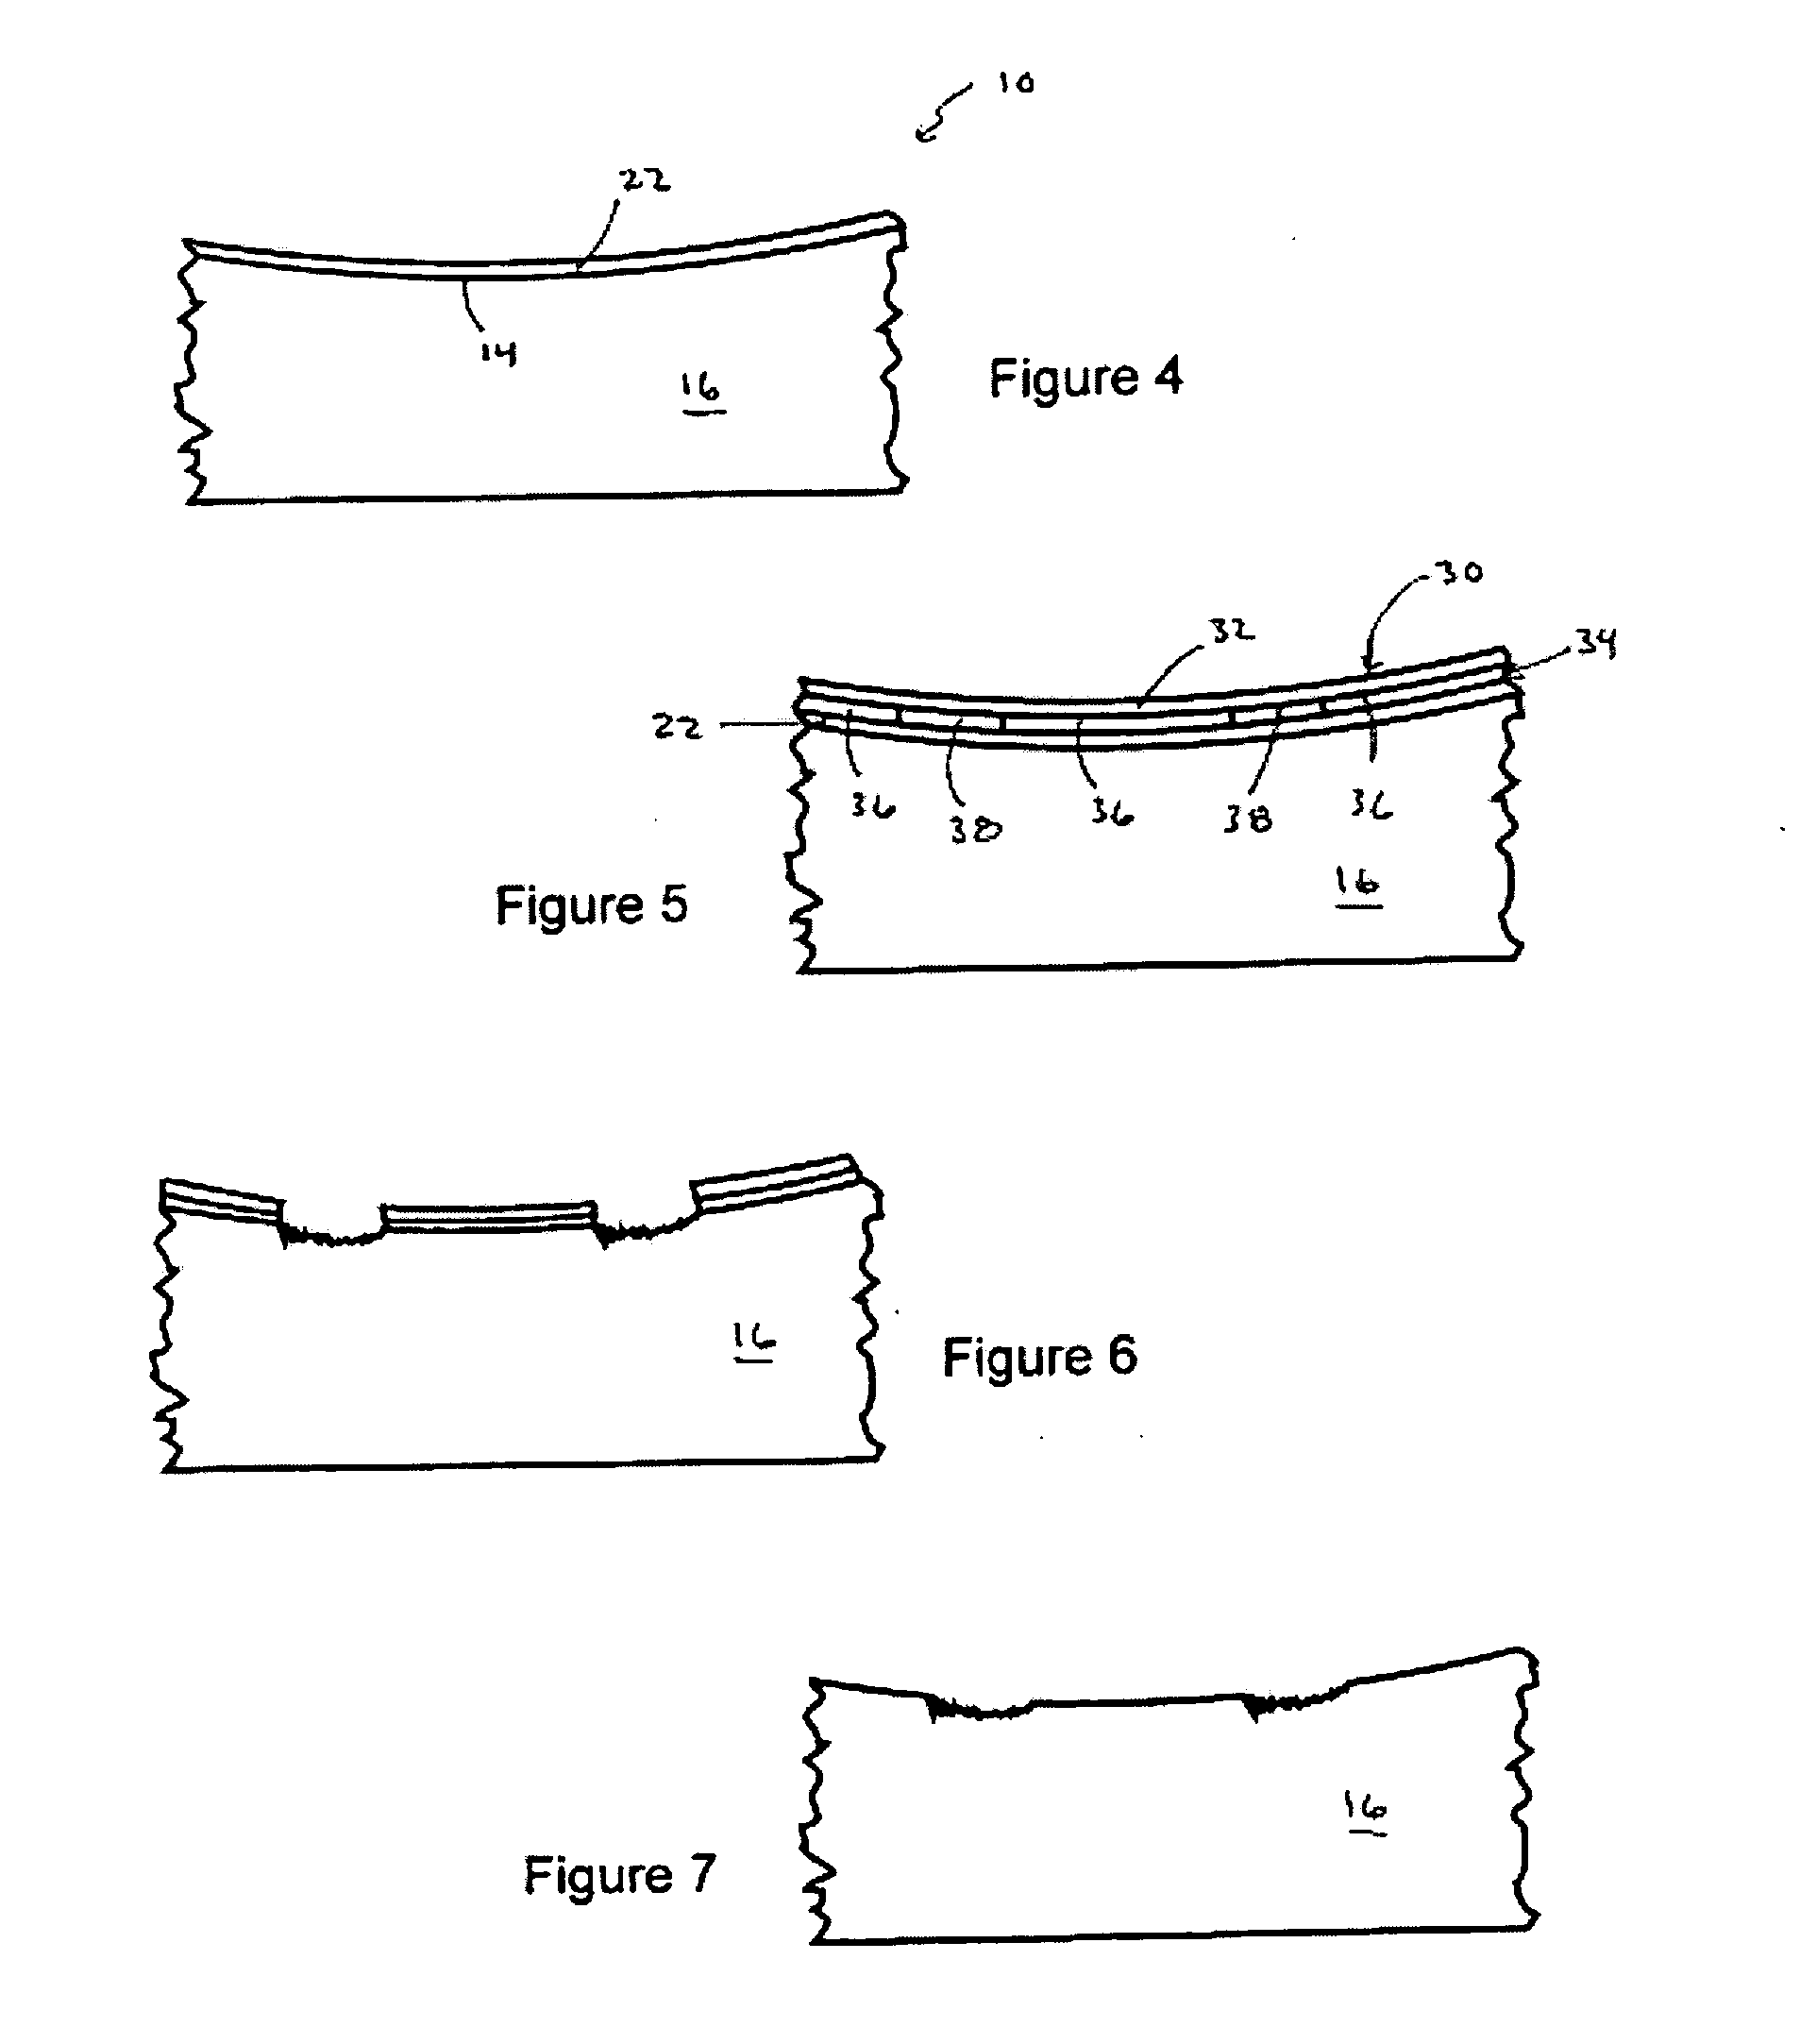 Product and method for protecting metal during etching